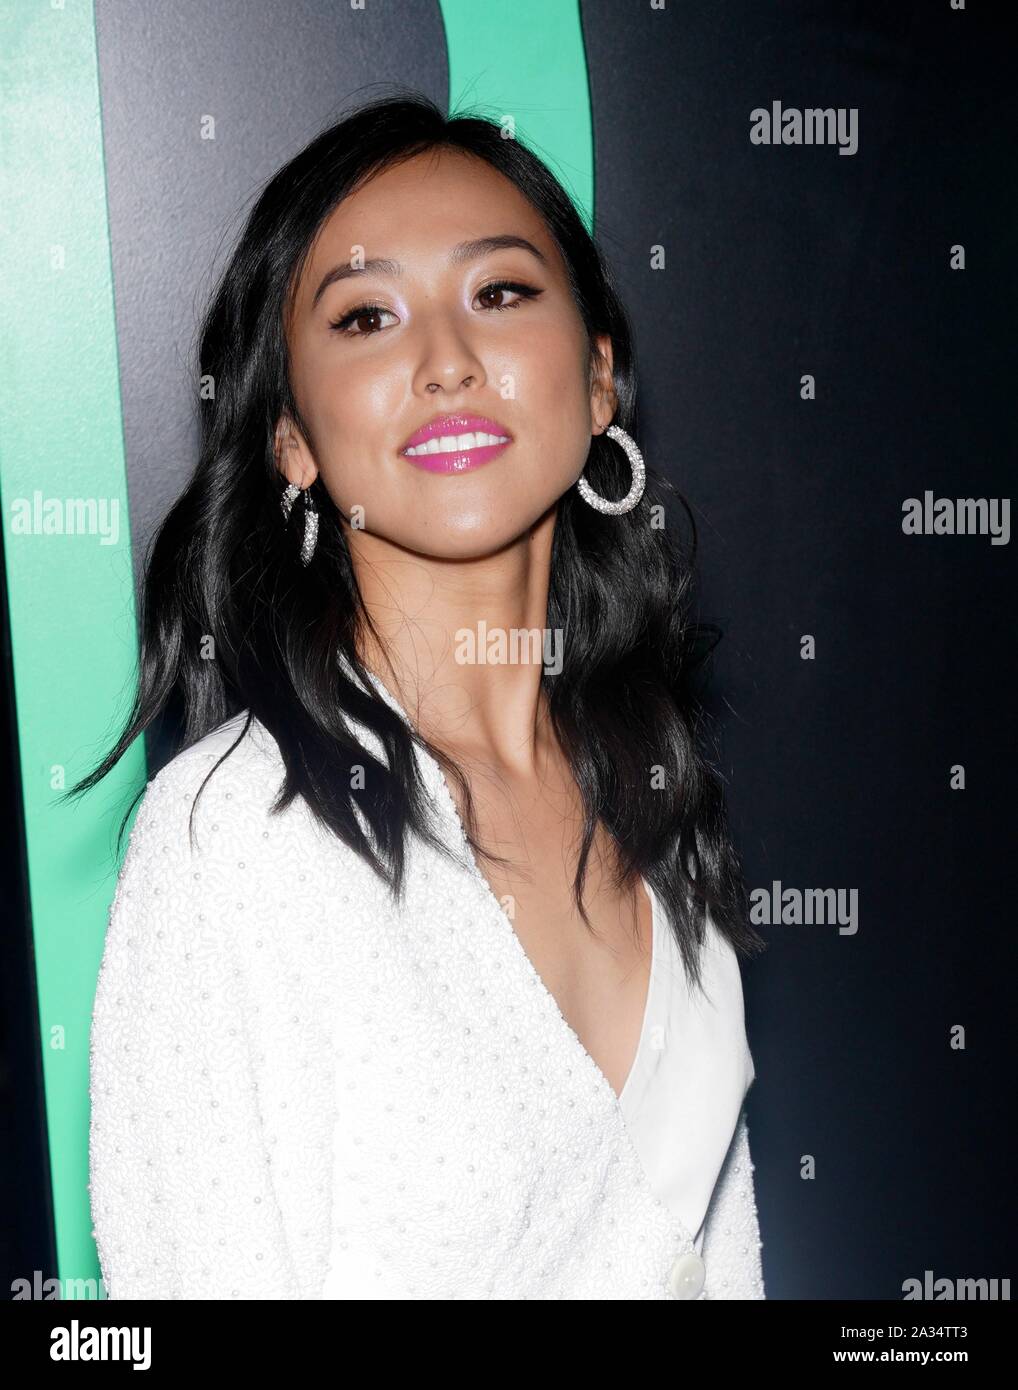 New York, NY, USA. 4th Oct, 2019. Lyrica Okano at arrivals for HULU Celebrates Halloween with HULUWEEN, 221 West Broadway, New York, NY October 4, 2019. Credit: Eli Winston/Everett Collection/Alamy Live News Stock Photo